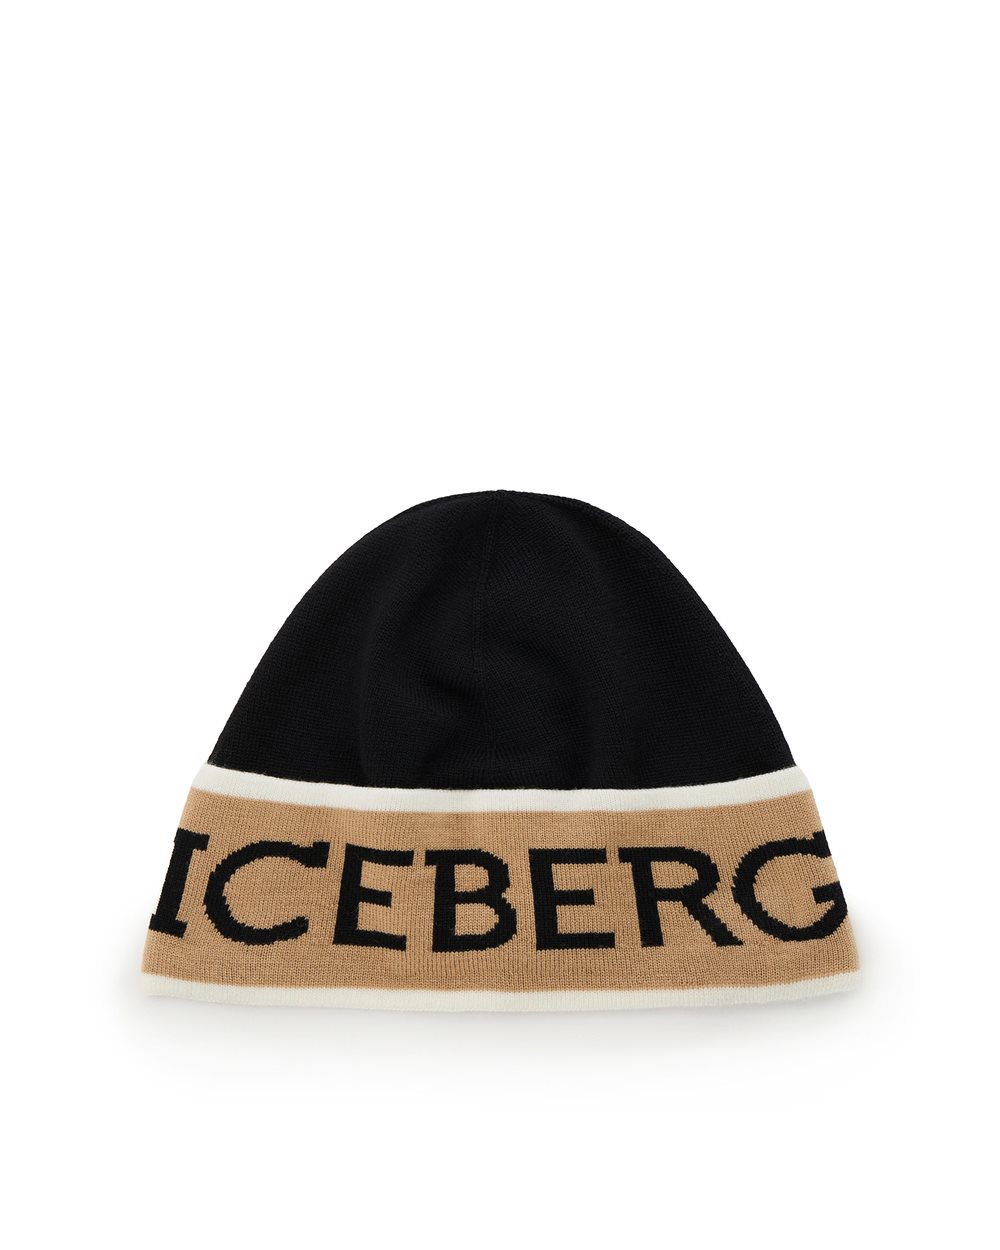 Black wool beanie with logo - PER FARE LE REGOLE | Iceberg - Official Website